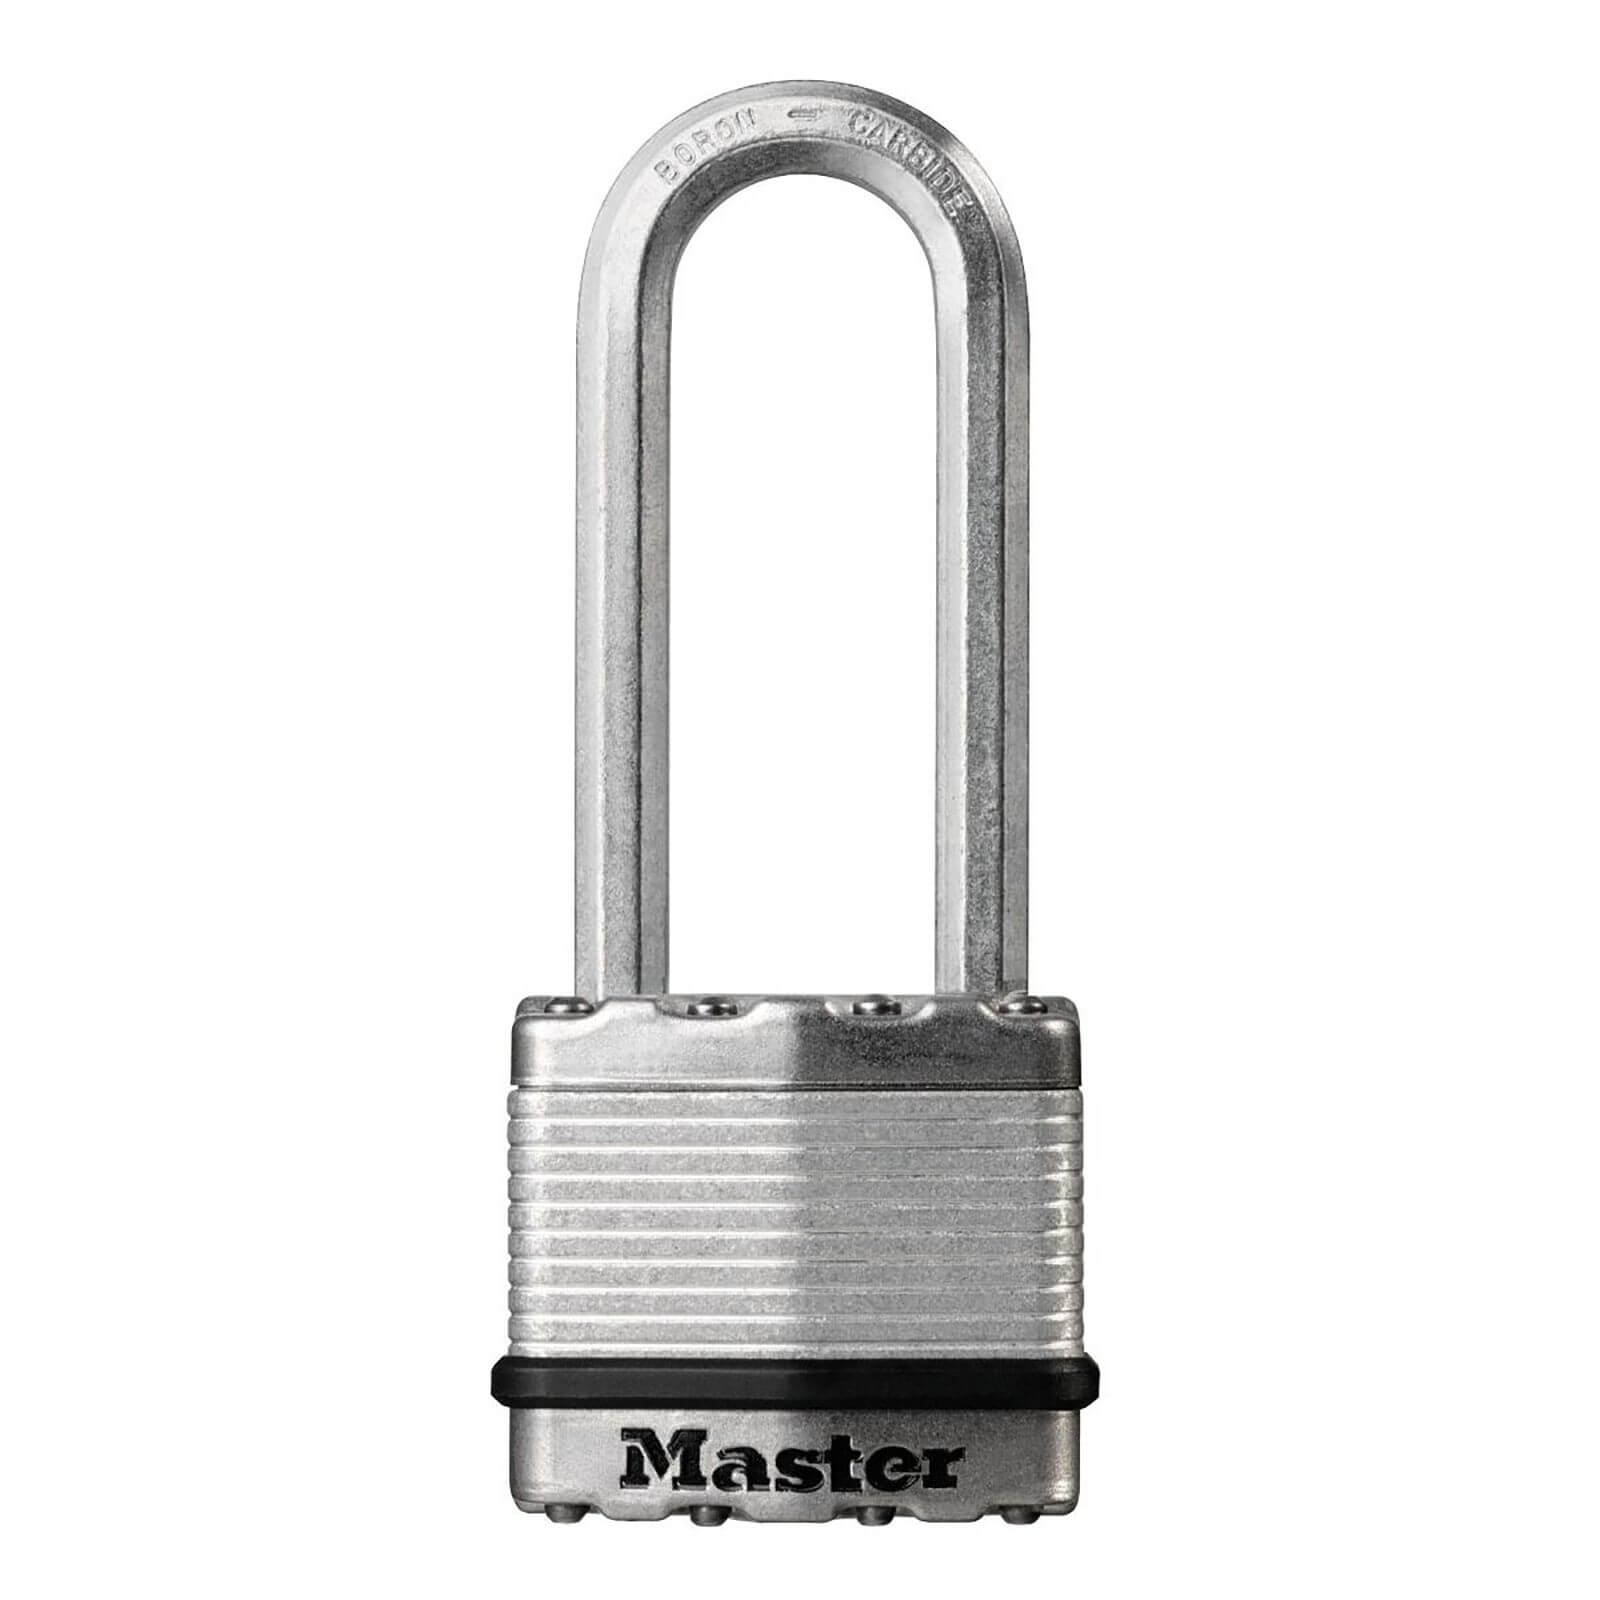 Master Lock Excell Laminated Long Shackle Steel Padlock - 45mm